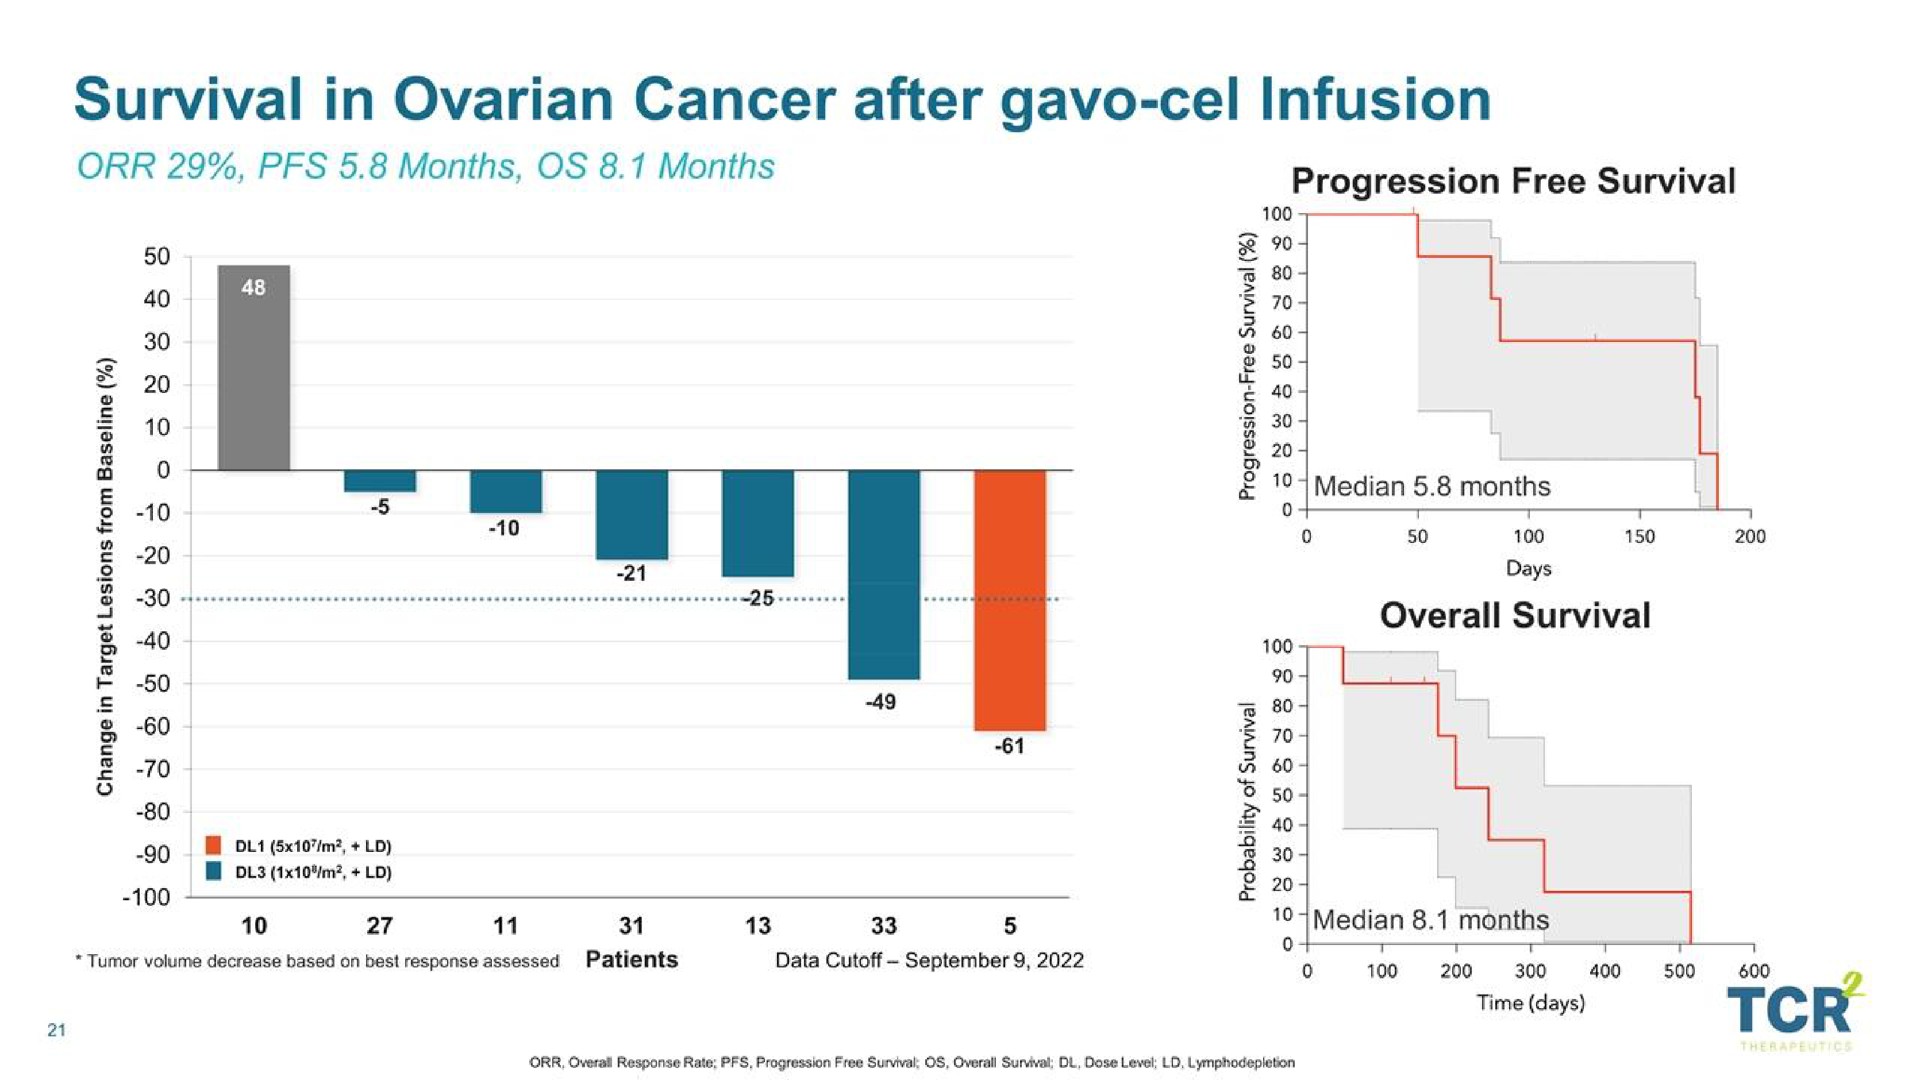 survival in ovarian cancer after infusion | TCR2 Therapeutics